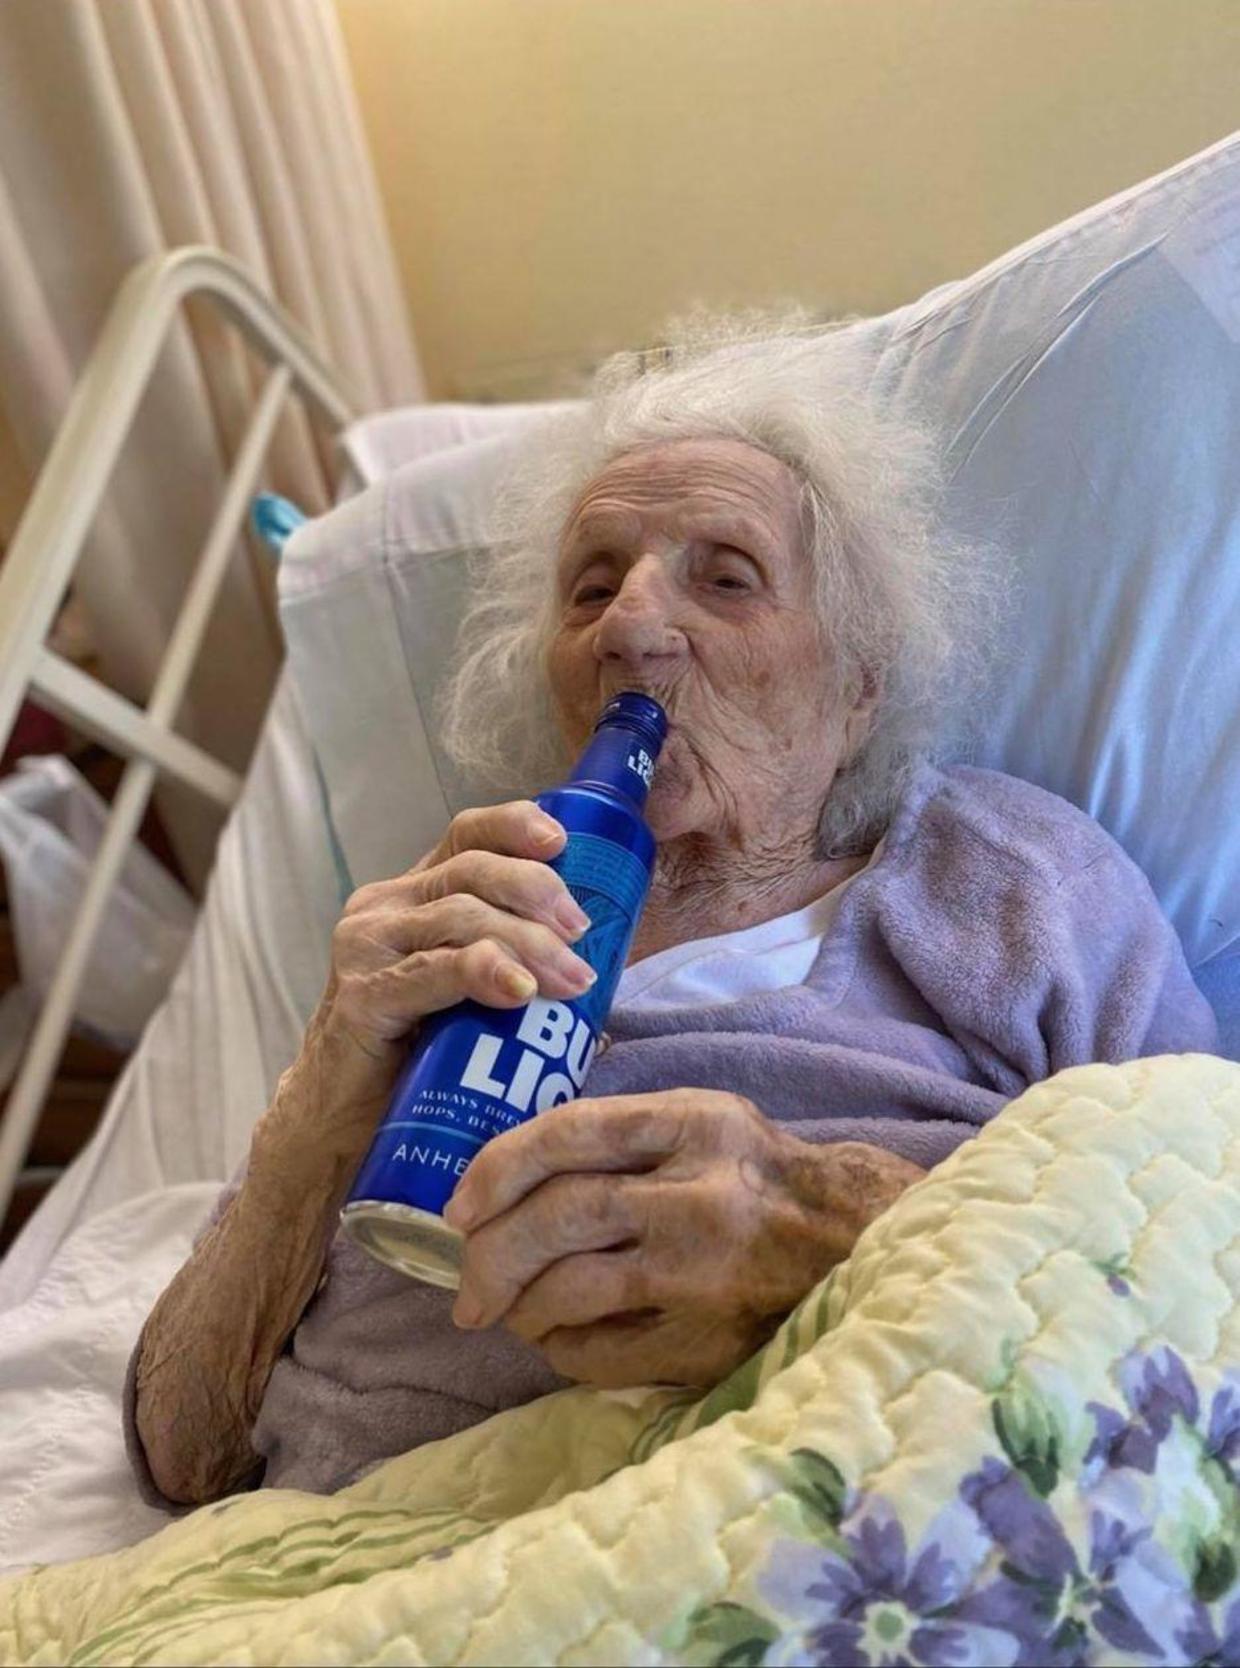 Jennie Stejna, 103, was the first resident at her Massachusetts nursing home to catch the novel coronavirus. She then became the first person to beat it after a 20-day fight, granddaughter Shelley Stejna Gunn told Wicked Local Easton. “She always had that feisty fighting spirit,” Shelley said. “She didn’t give up.”